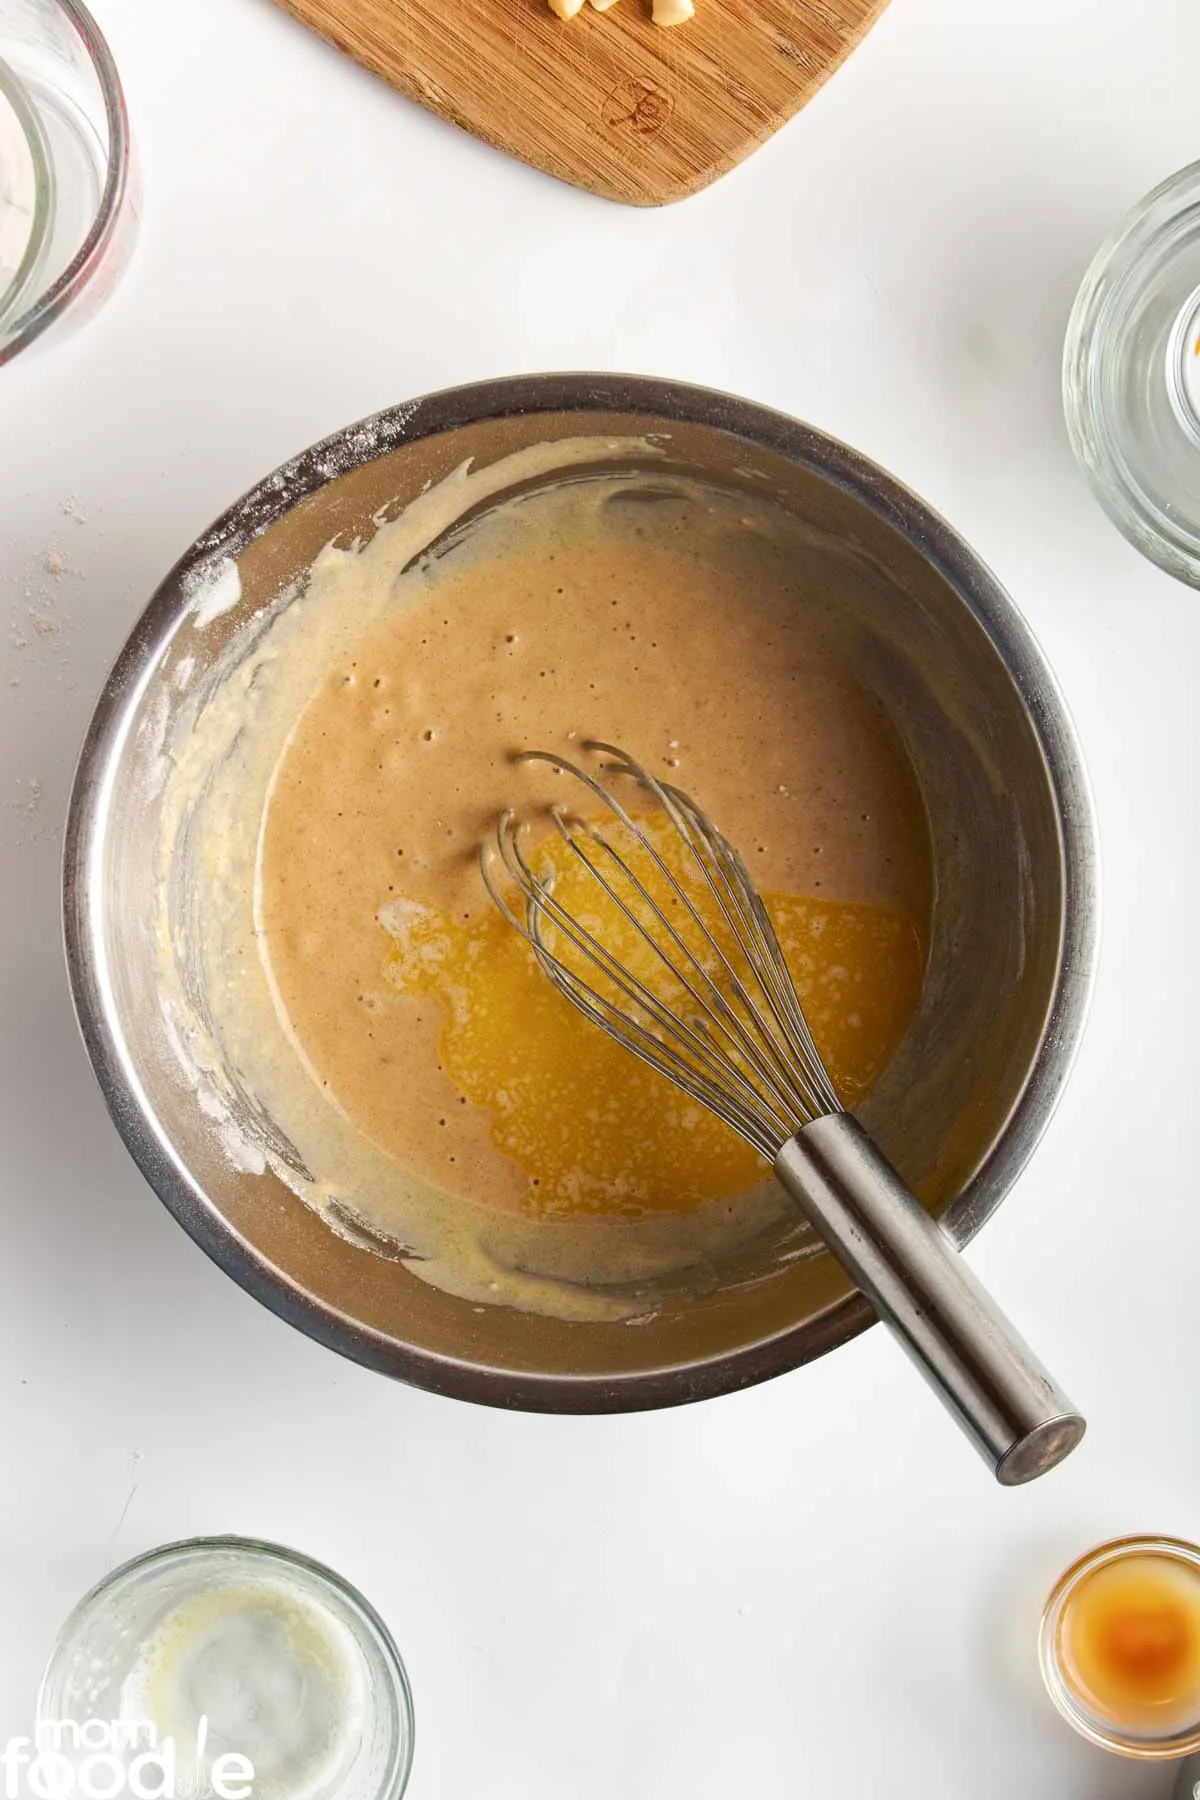 Stir in melted butter into the wet ingredient